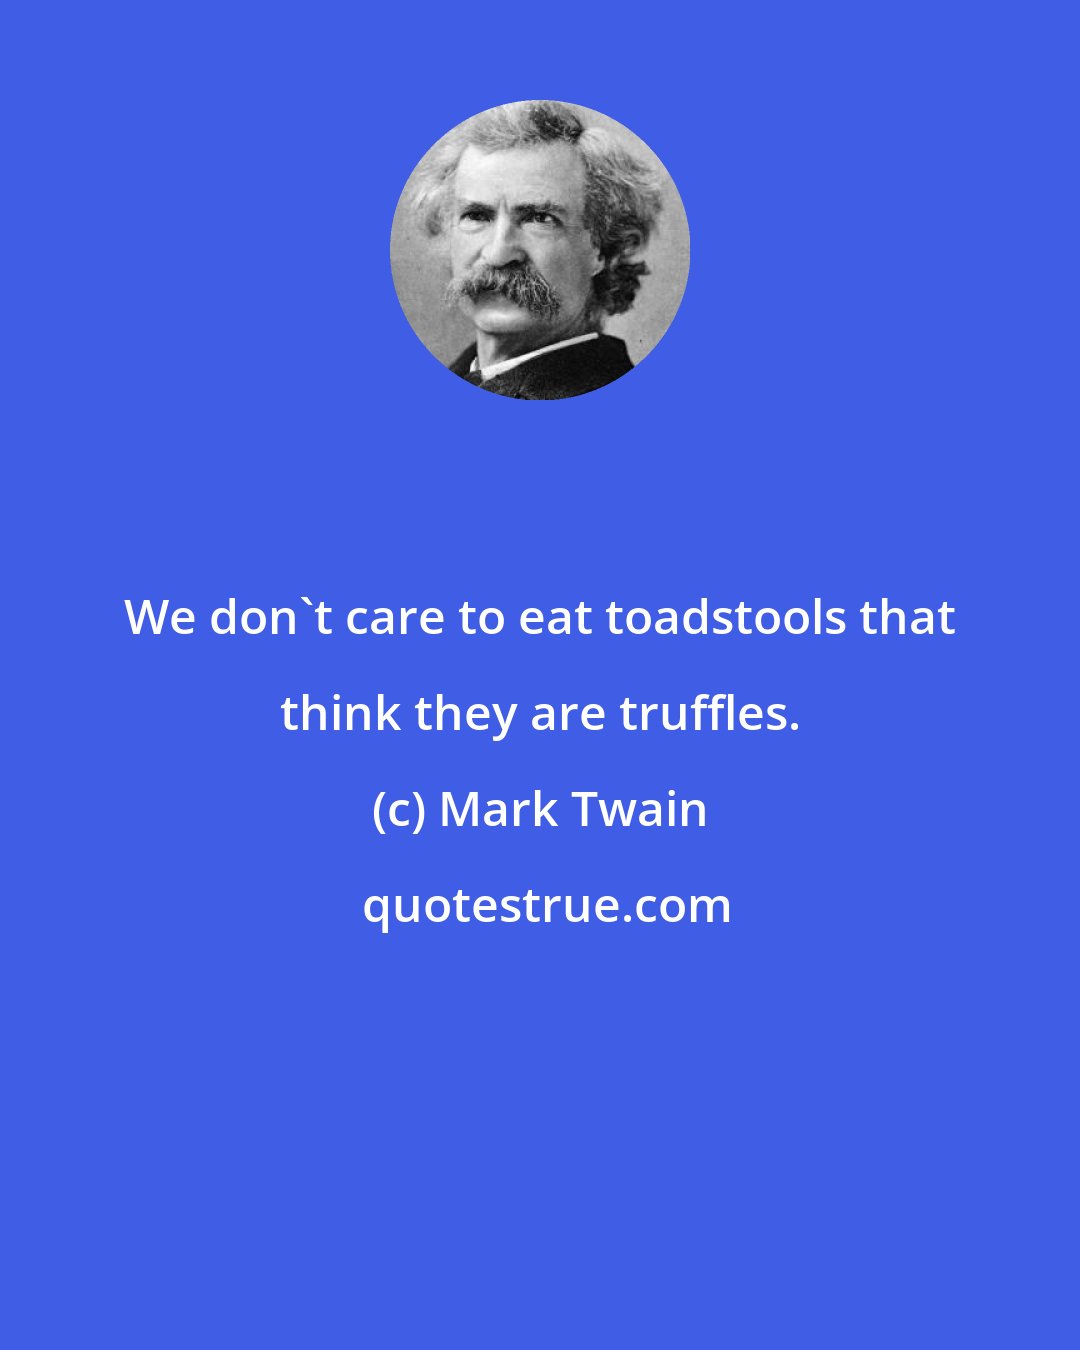 Mark Twain: We don't care to eat toadstools that think they are truffles.